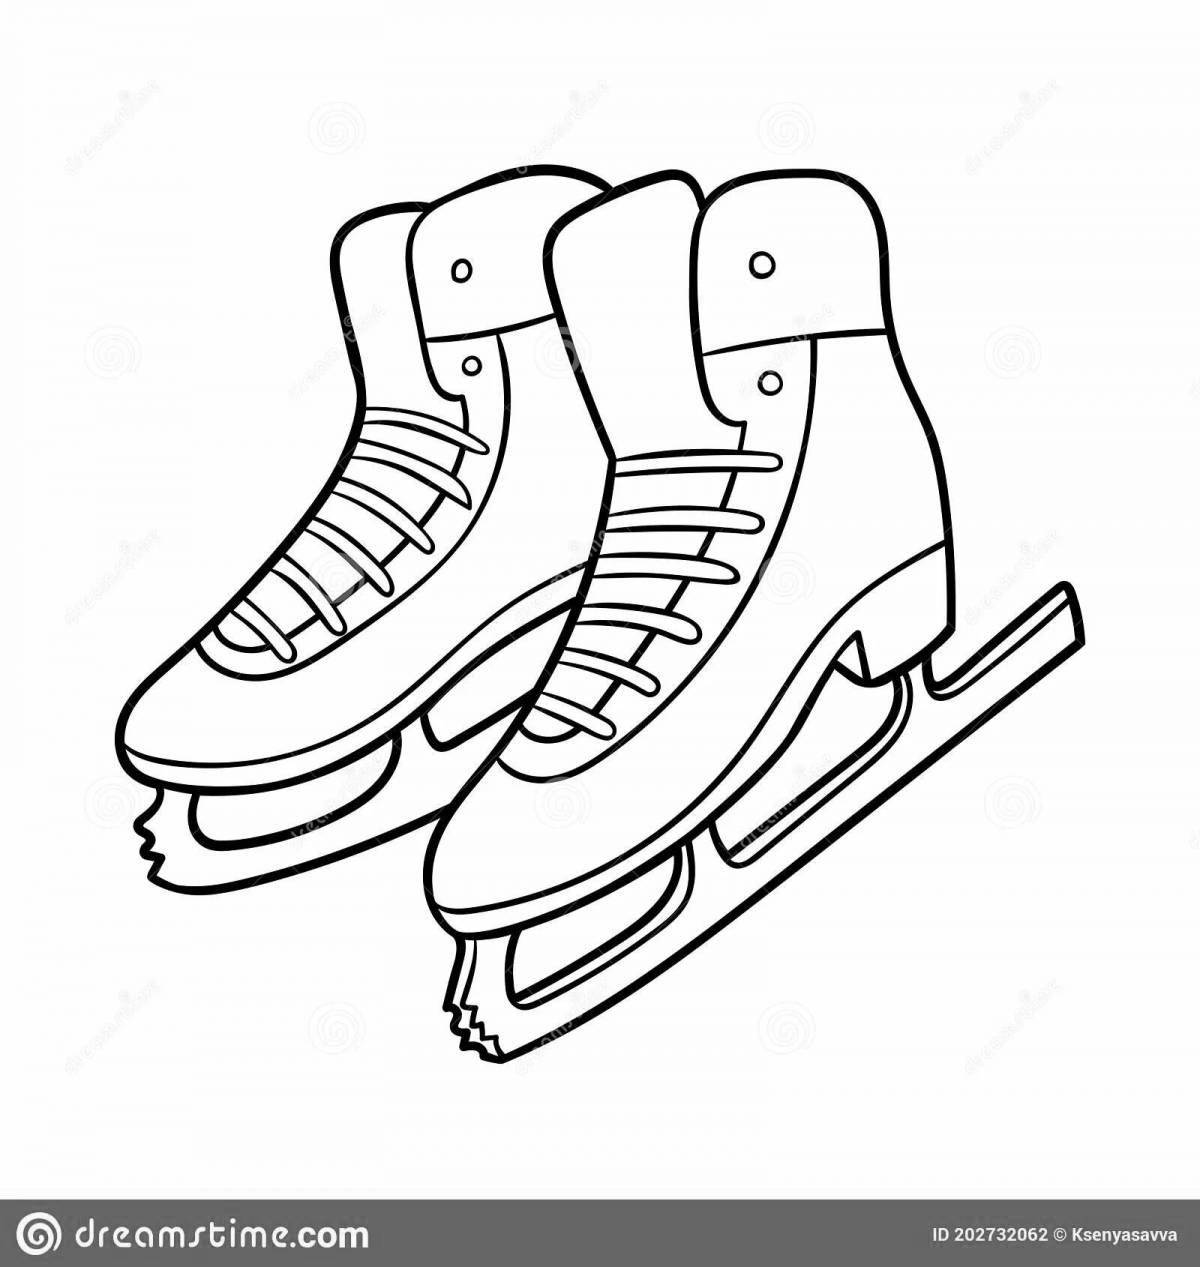 Color-explosion skis skates sled coloring page